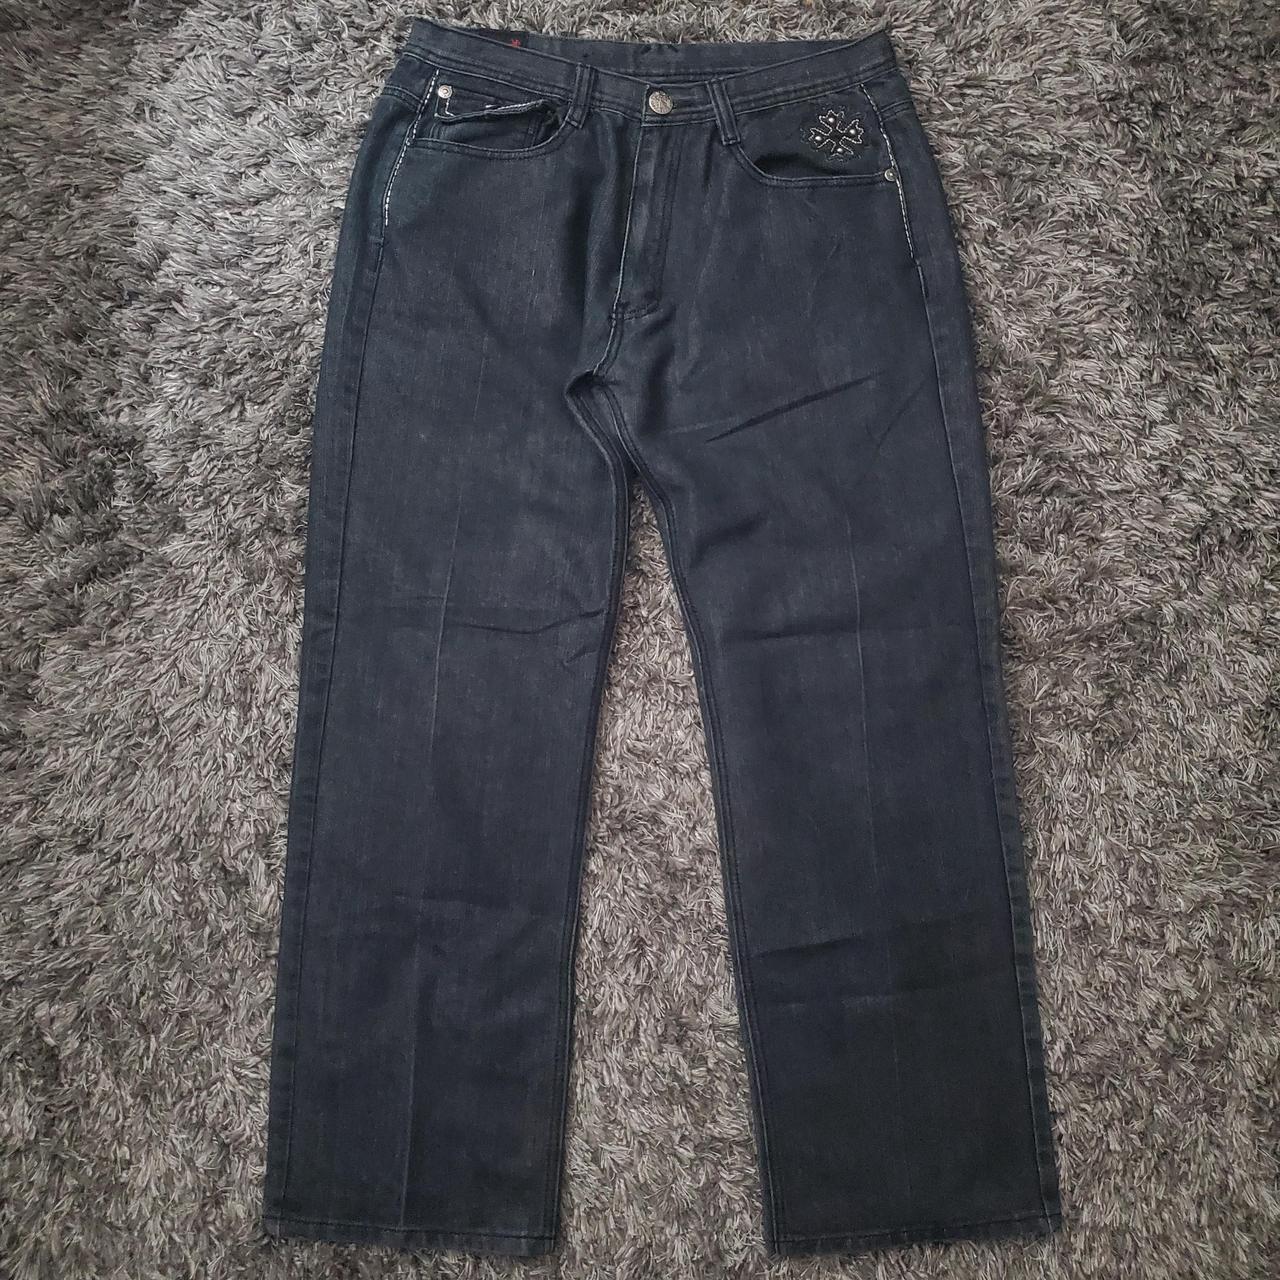 Winged jeans these rare and fire buuy #jncojeans... - Depop